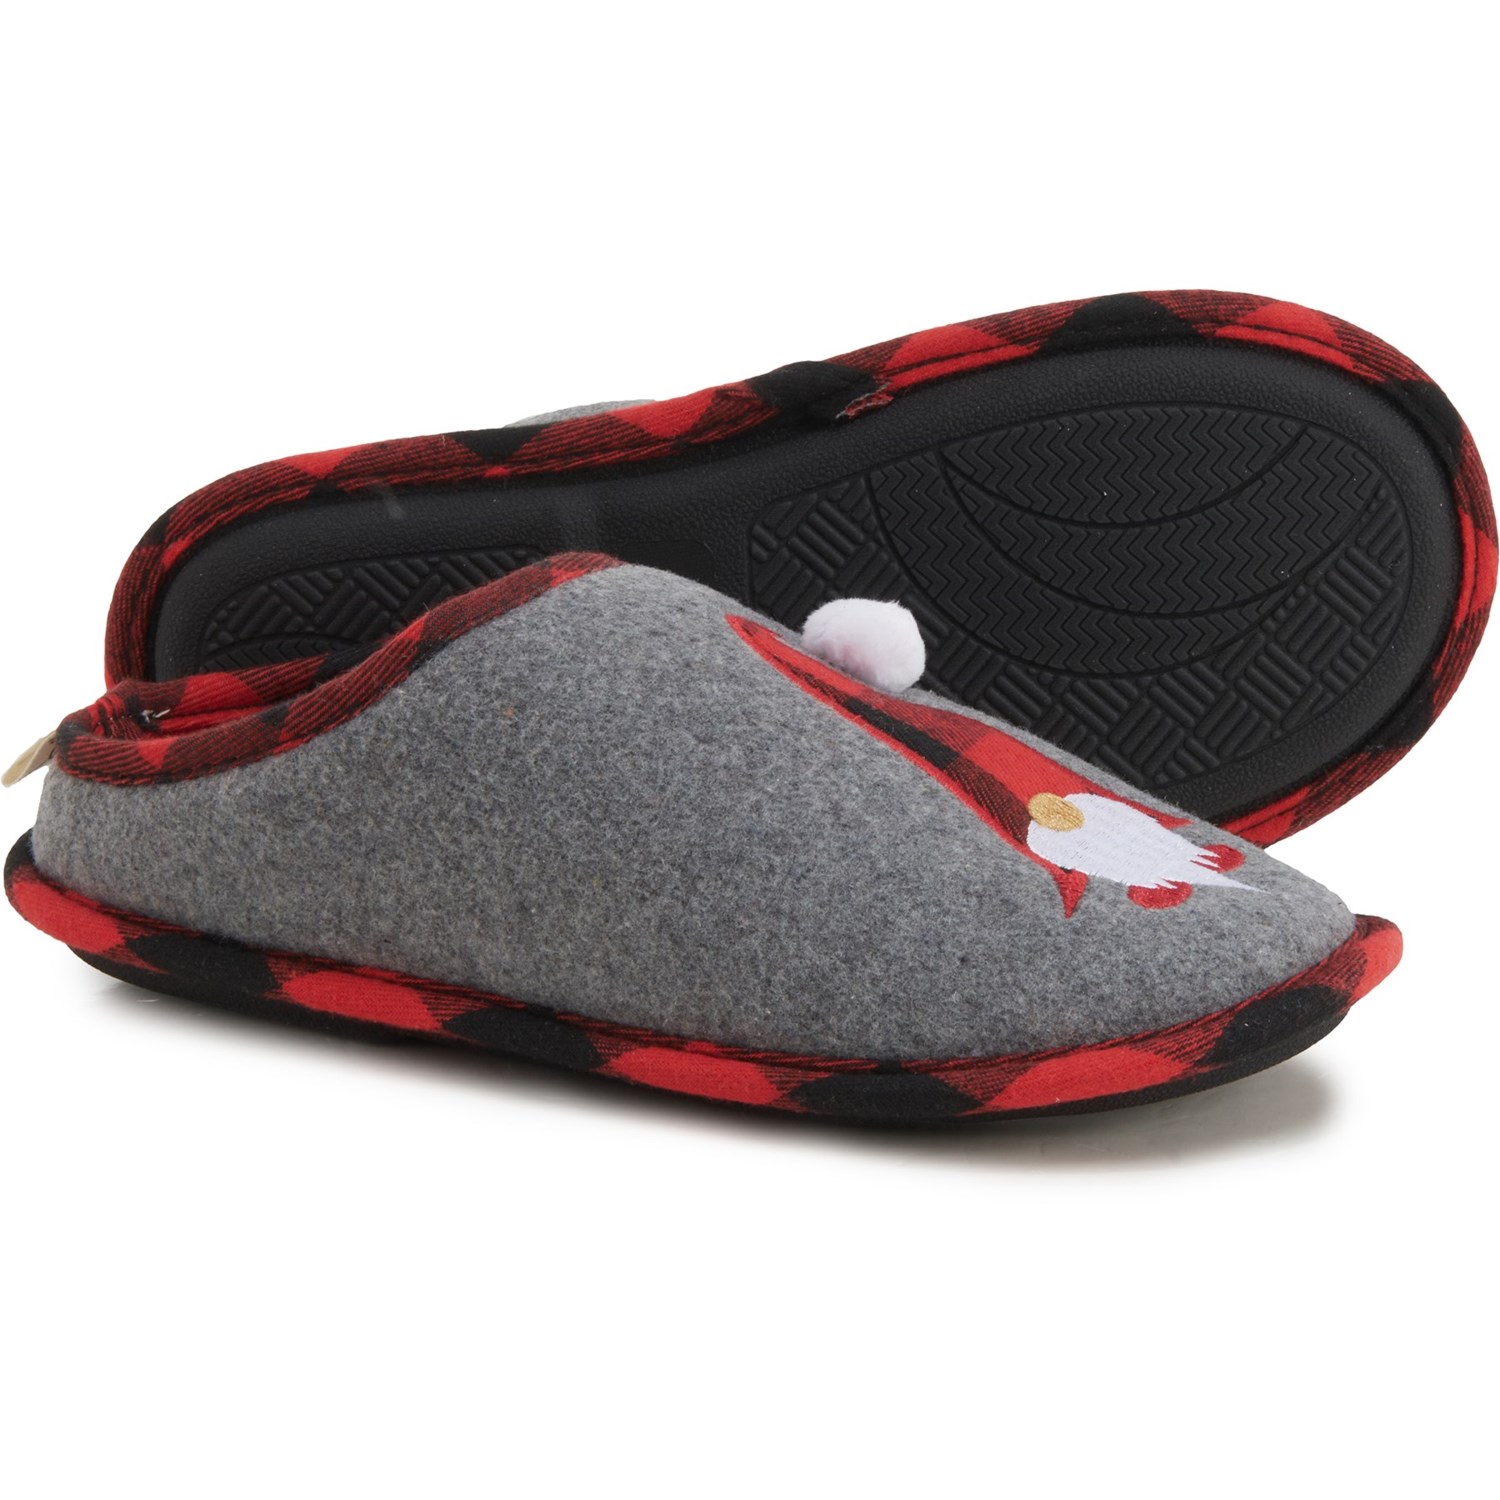 Dakota Fleece Gnome Holiday Slippers (For Toddlers and Little Kids)